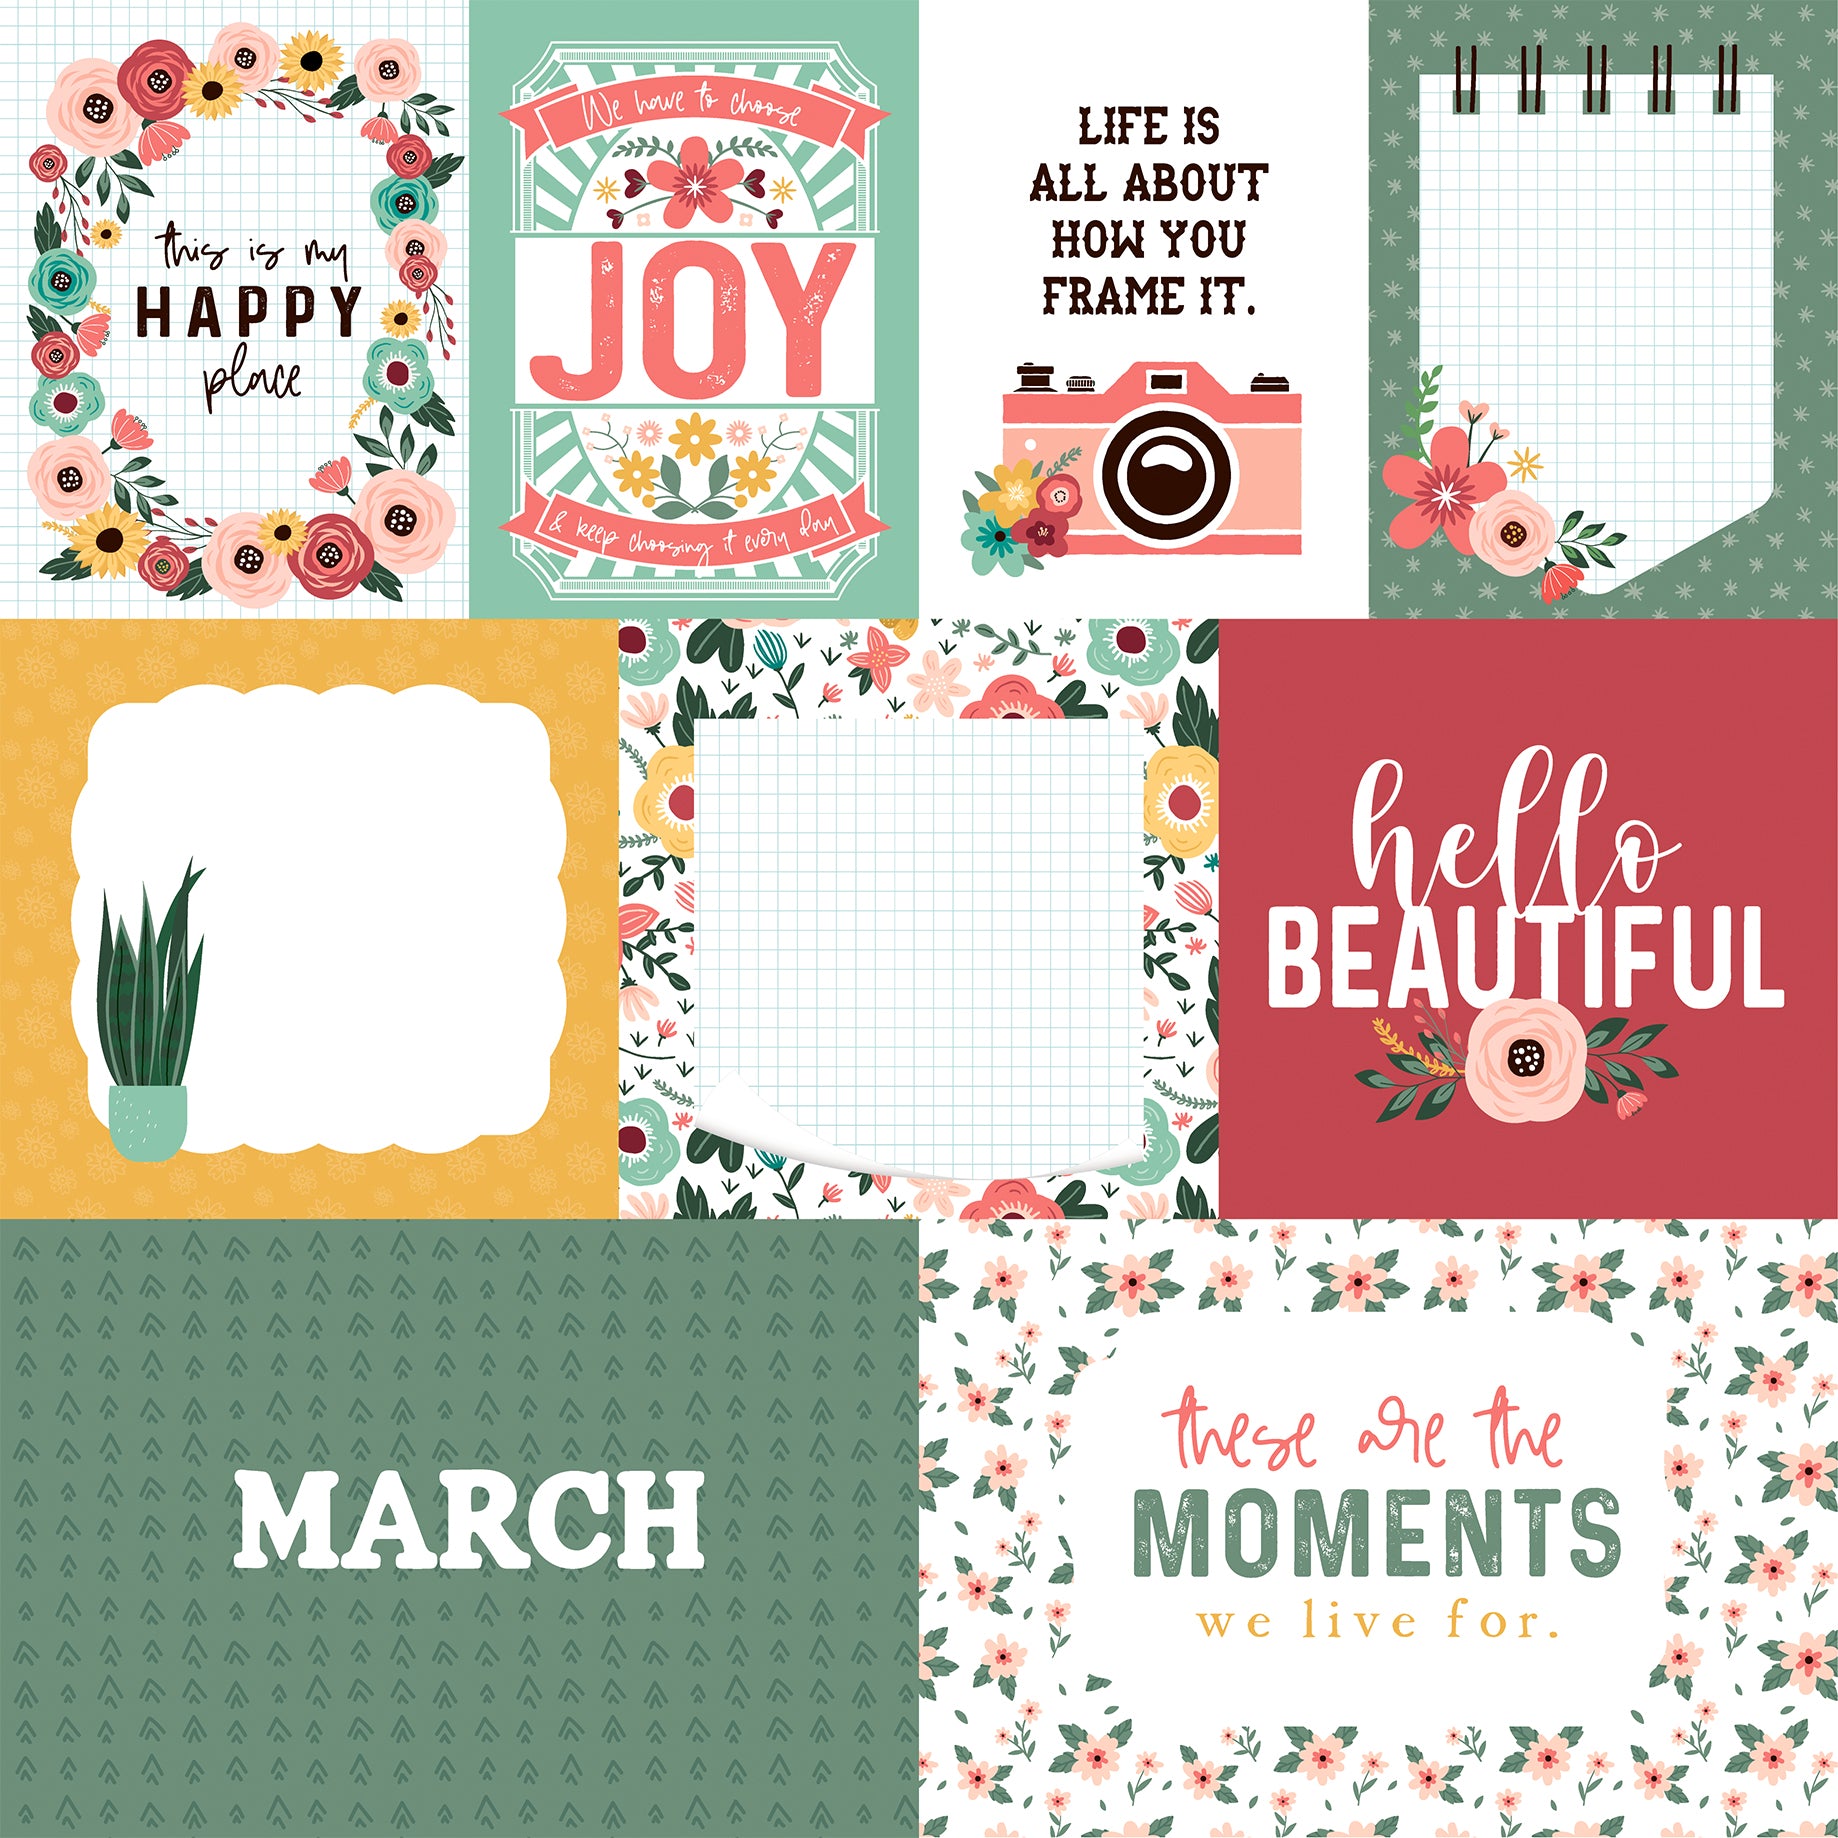 Year In Review Collection March 12 x 12 Double-Sided Scrapbook Paper by Echo Park Paper